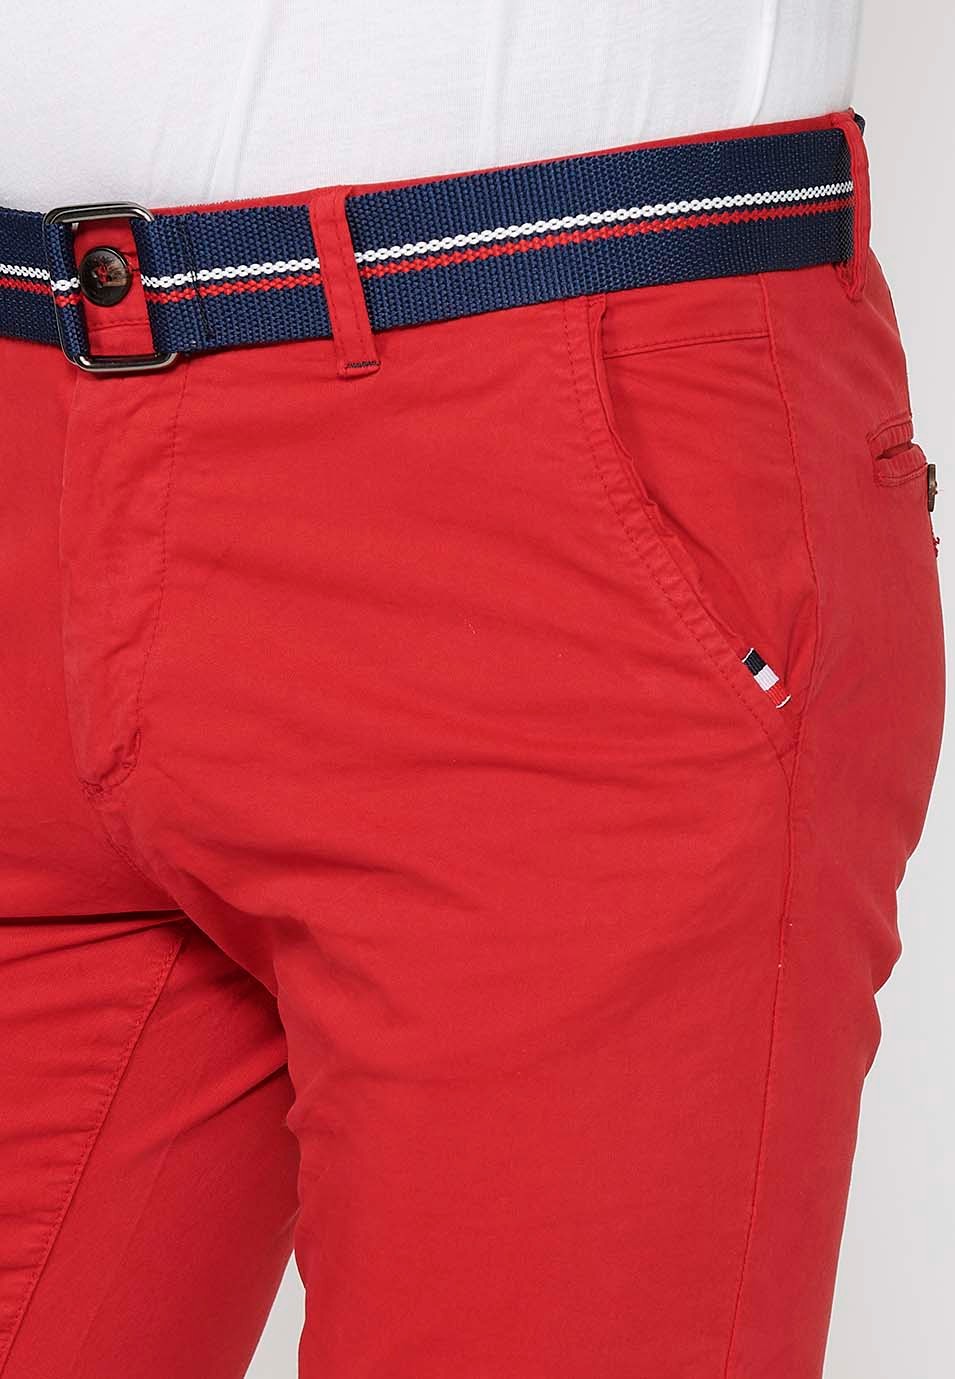 Shorts with cuffed finish with front closure with zipper and button and belt in Red for Men 5